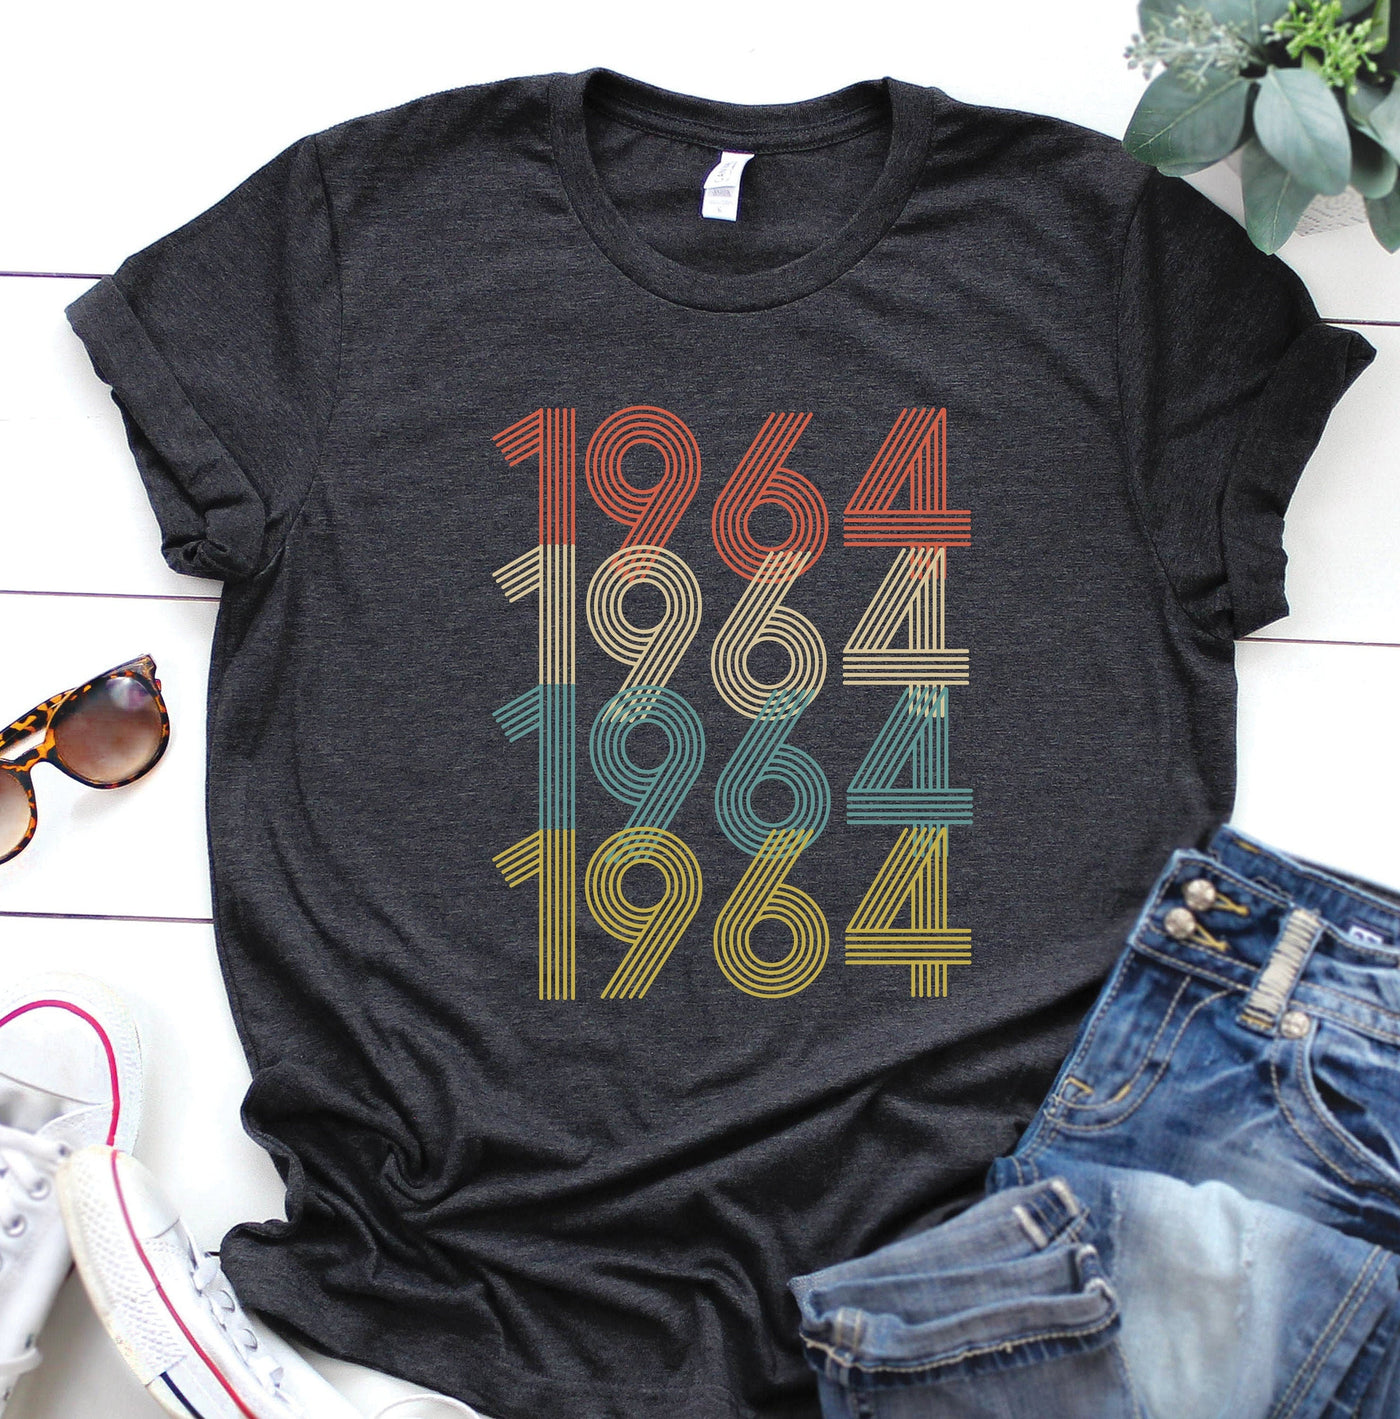 Vintage 1964 Shirt, 59th Birthday, gift for her